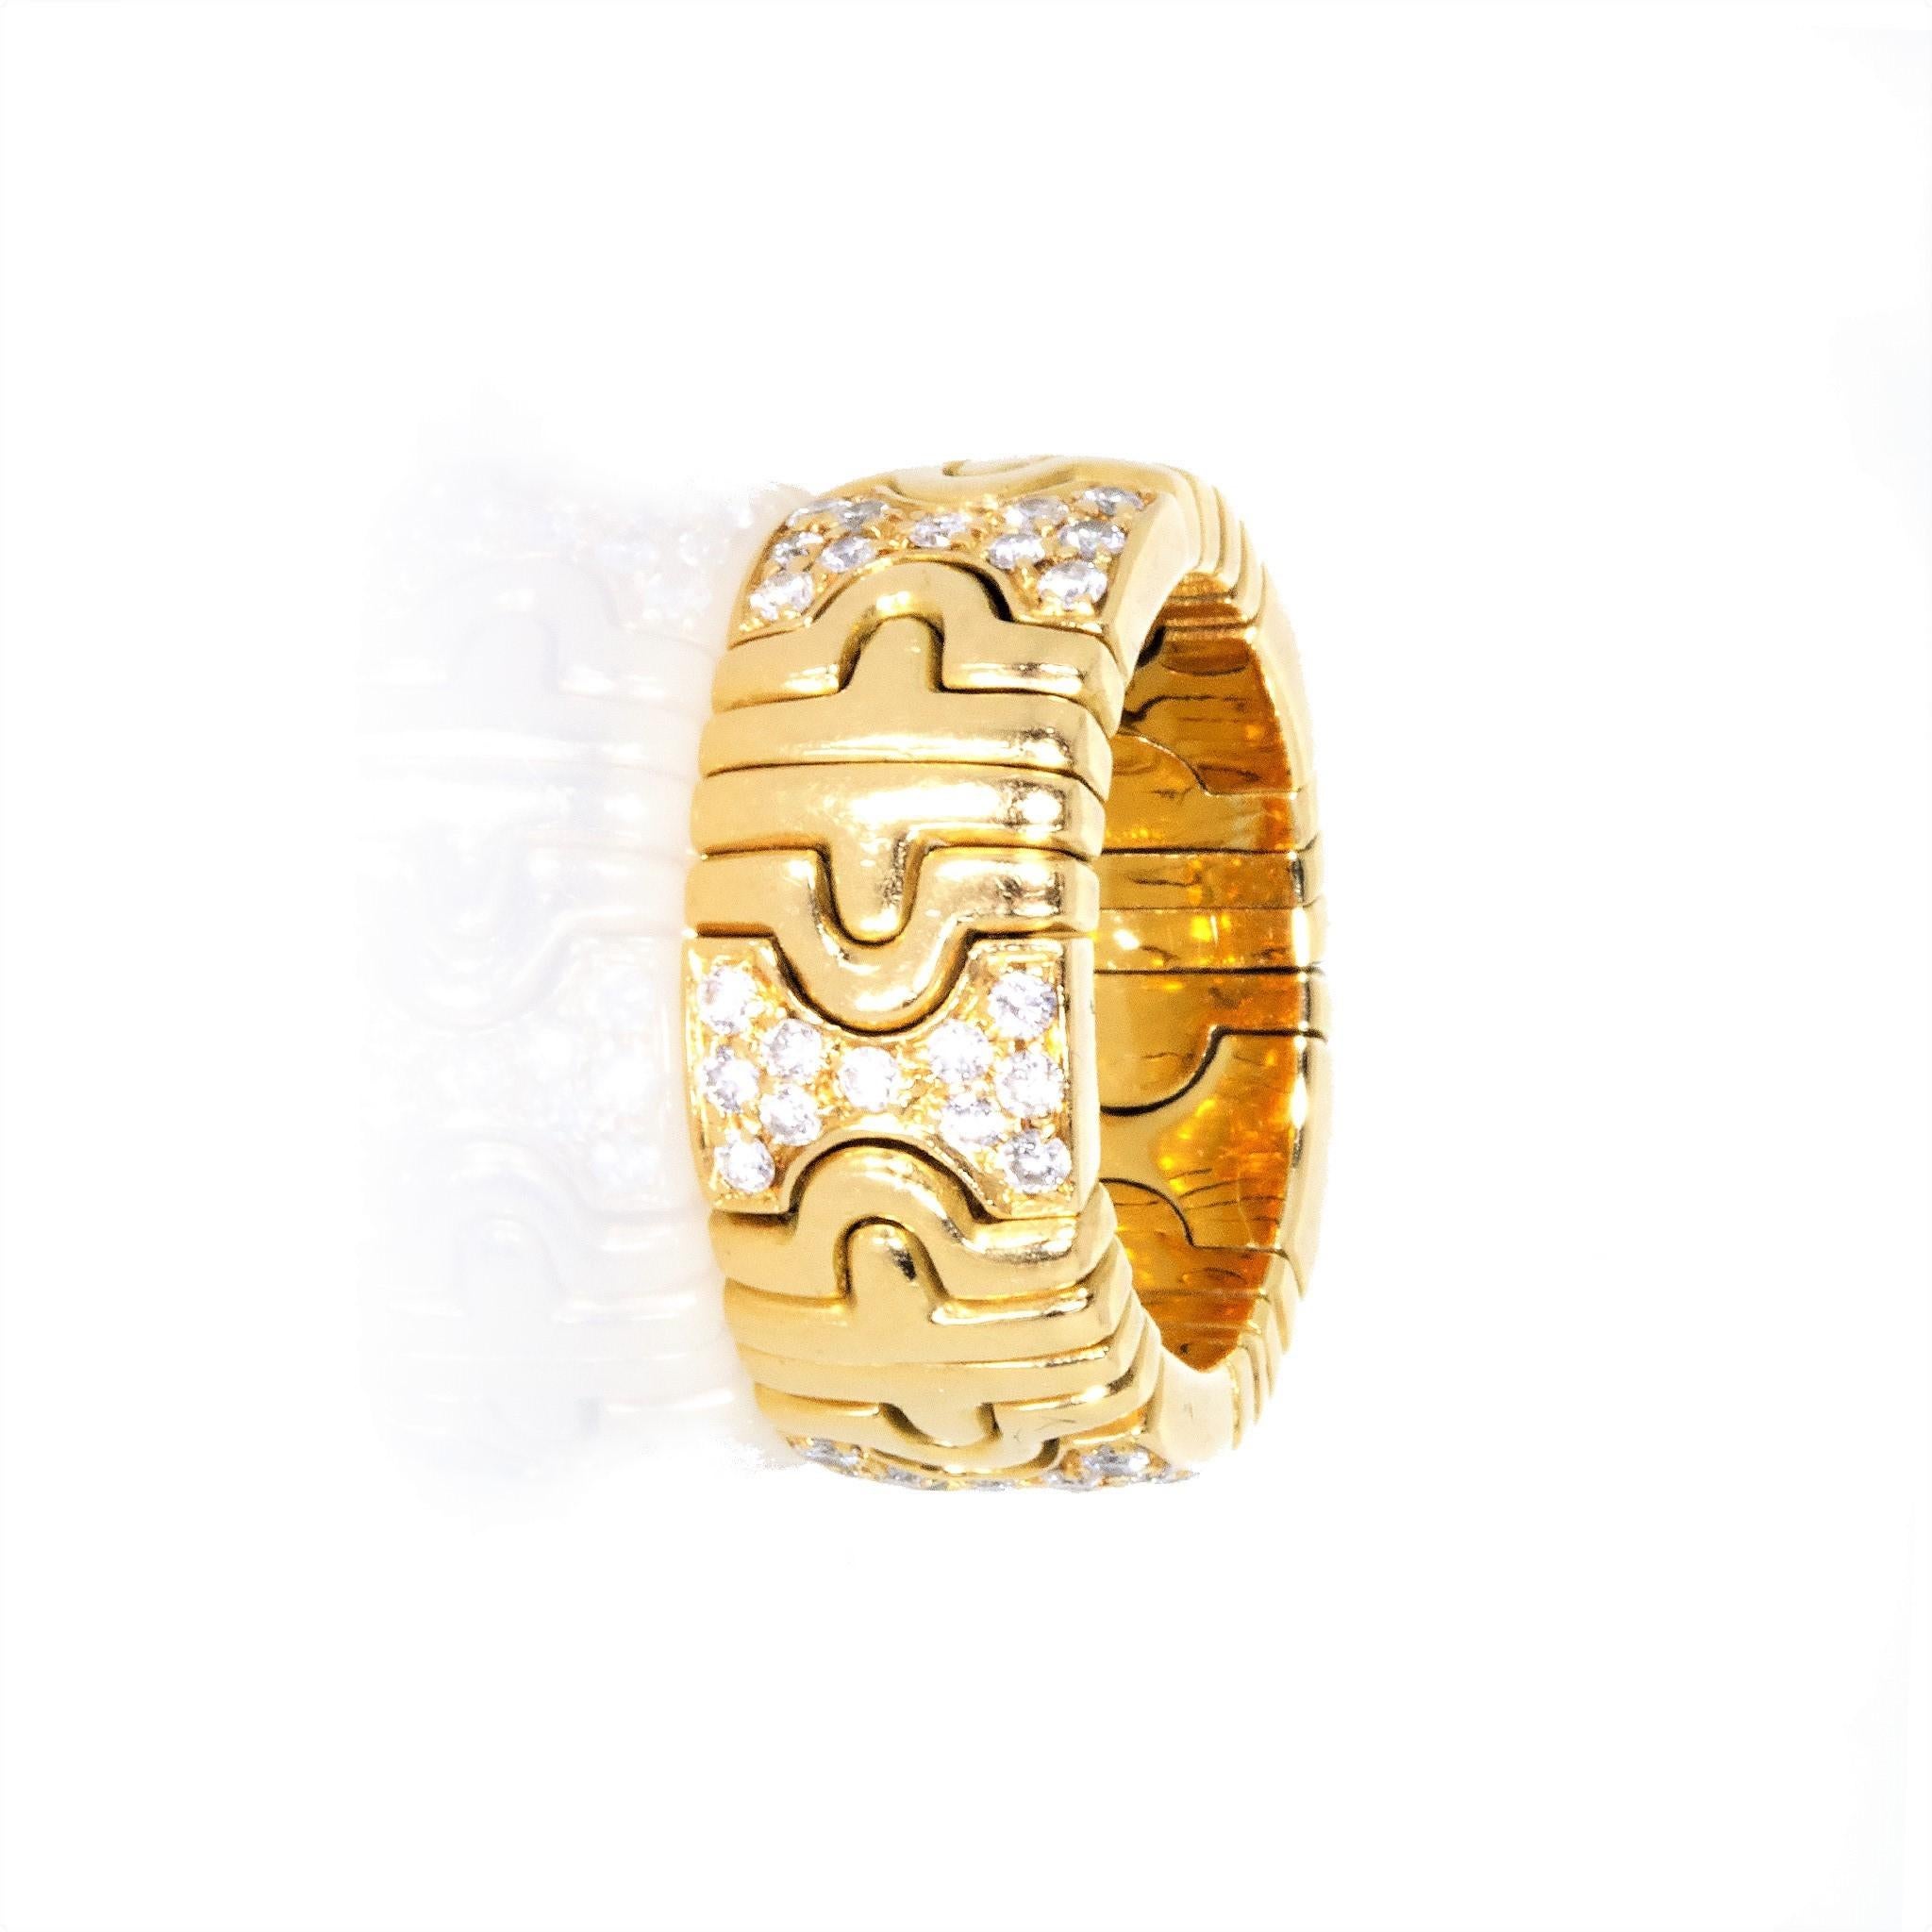 *** Comes with its original Bvlgari Ring Box ***

METAL TYPE: 18K Yellow Gold
STONE WEIGHT: 0.55ct twd
TOTAL WEIGHT: 11.8g
RING SIZE: 5 - Flexible